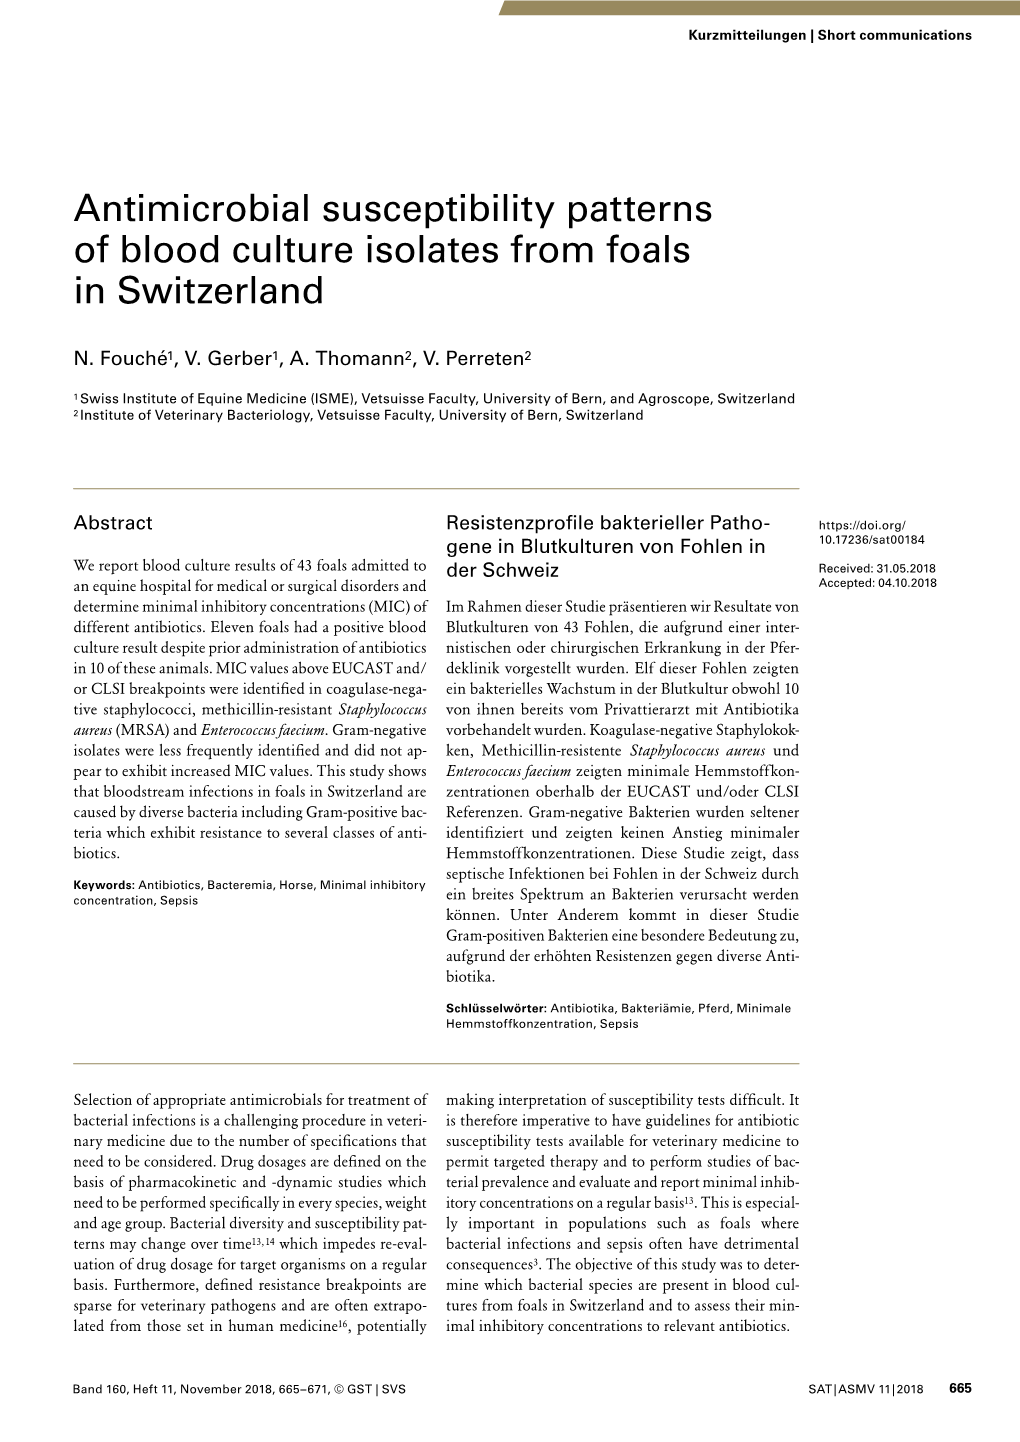 Antimicrobial Susceptibility Patterns of Blood Culture Isolates from Foals in Switzerland